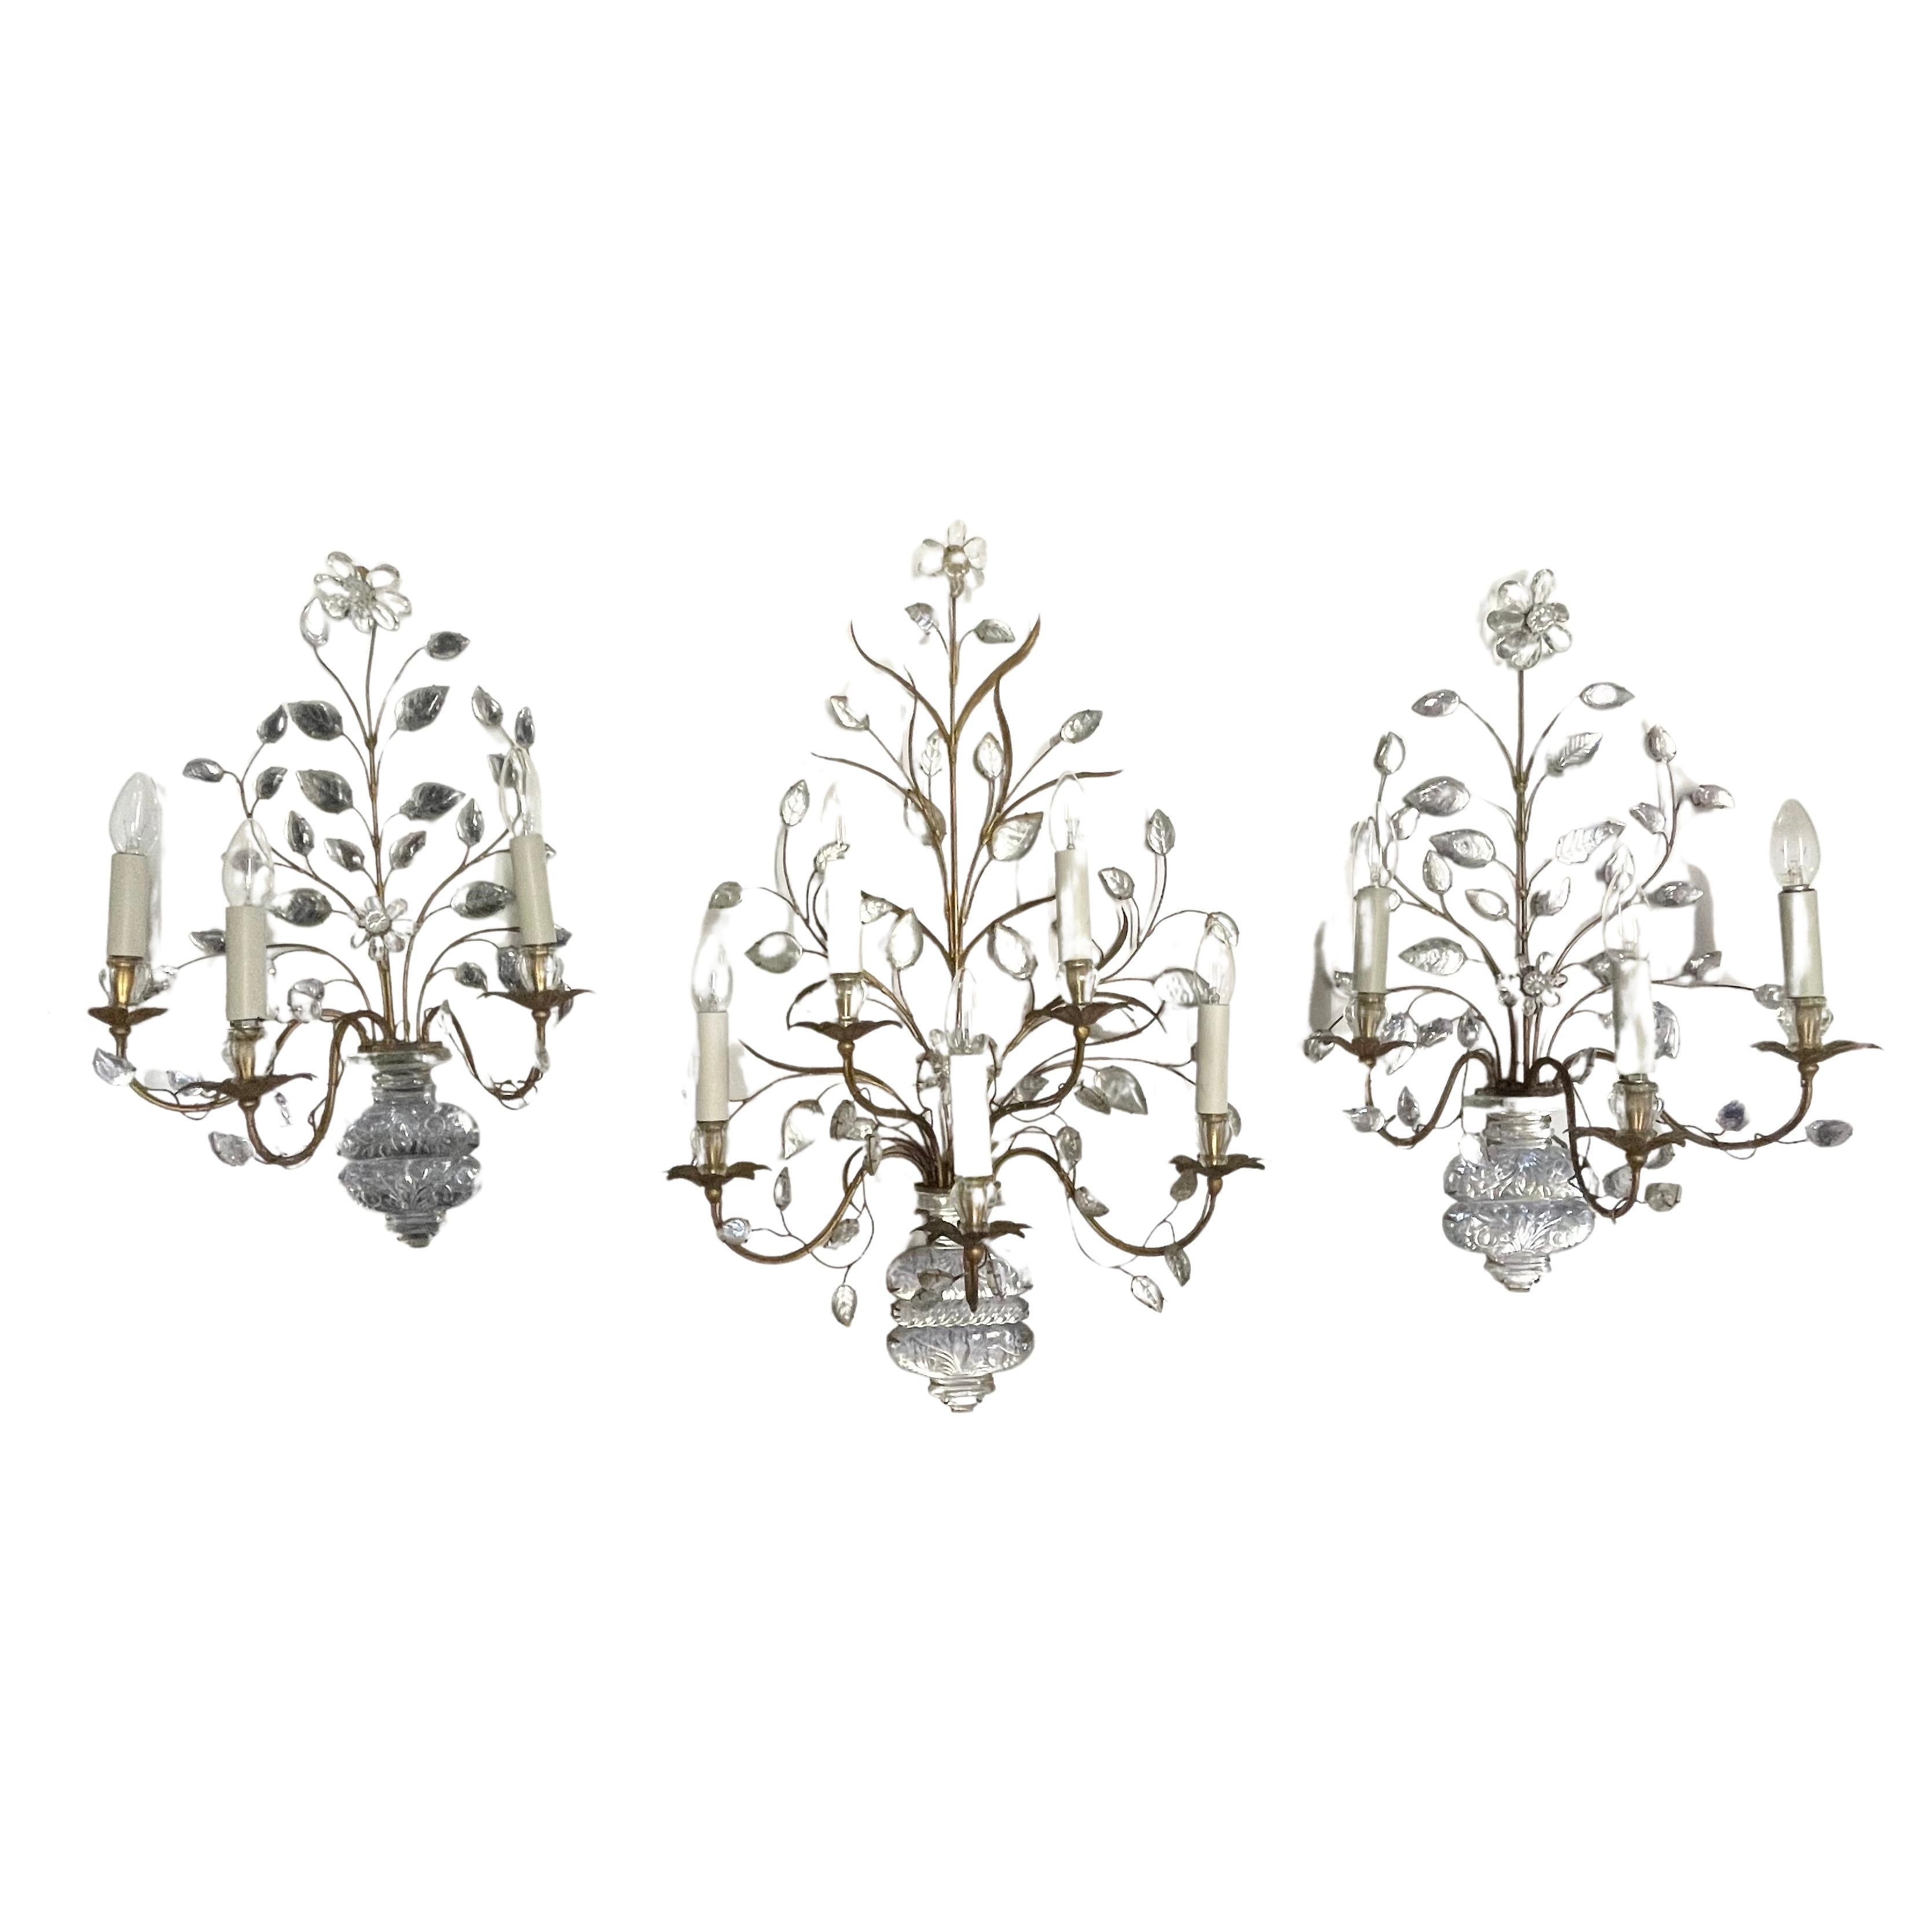 A wonderful and rare set of three large gilt iron and crystal wall sconces by Maison Baguès, Paris, circa 1930s.
The measurements o a three-lights sconces:
Height 24.40 inches x Width 16.53 inches x D 9.44 inches

The dimensions of the with